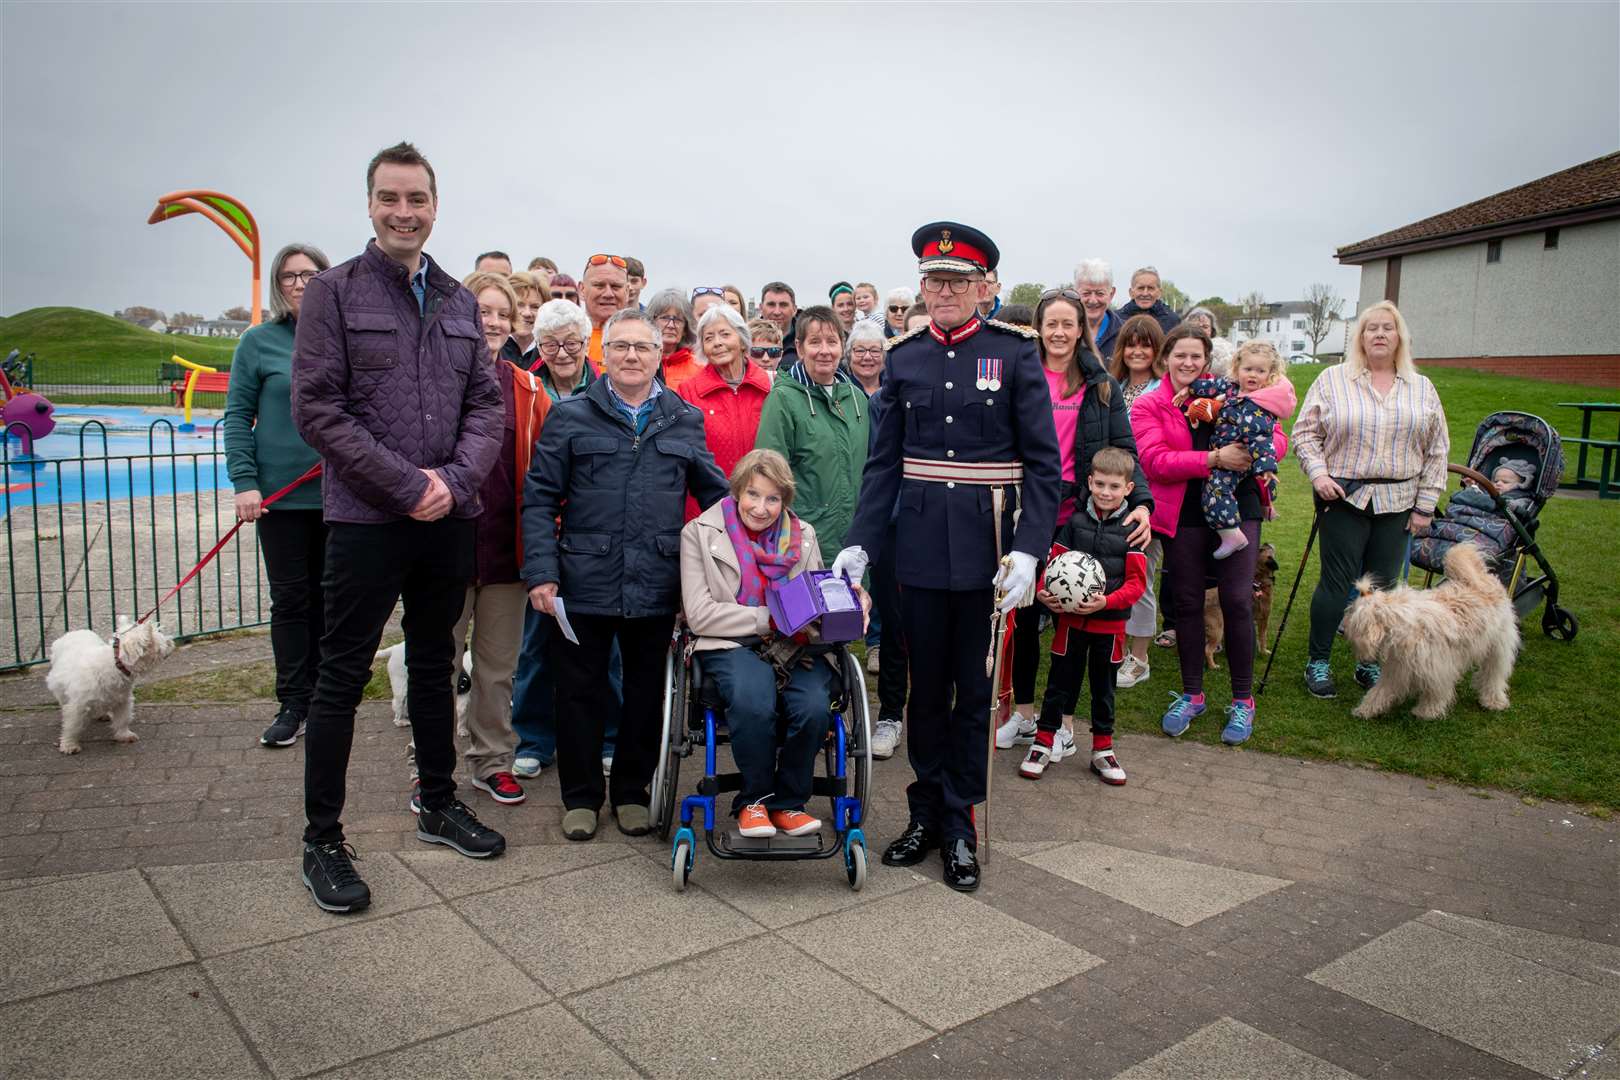 (front, left to right) Team Hamish, Team Hamish Sam and Lily Hey, Danny and Liz Bow with Lord Lieutenant of Nairnshire, Mr George Asher and some of the Nairn Community. Picture: Callum Mackay.